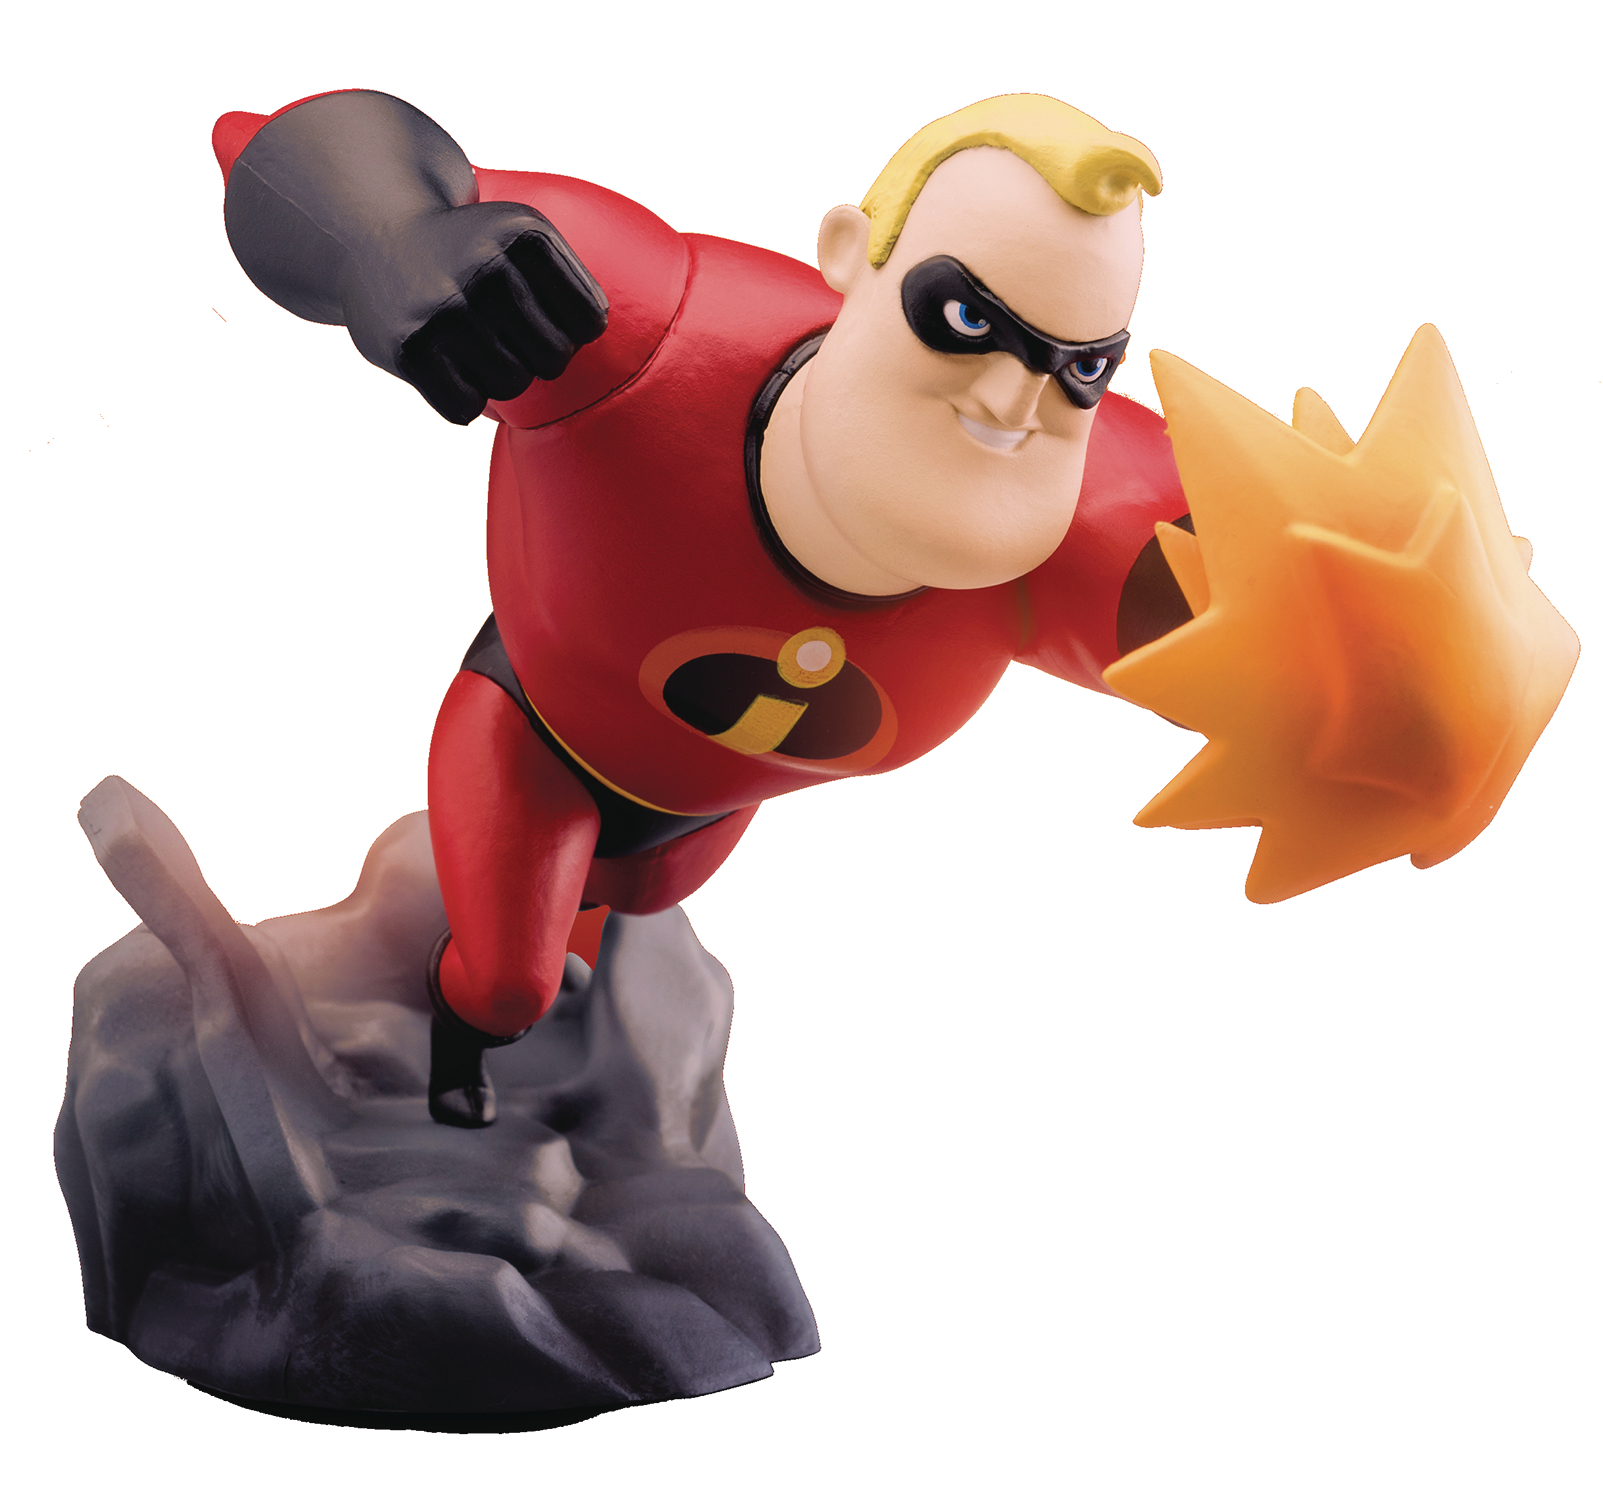 INCREDIBLES MEA-005 MR INCREDIBLE PX FIG